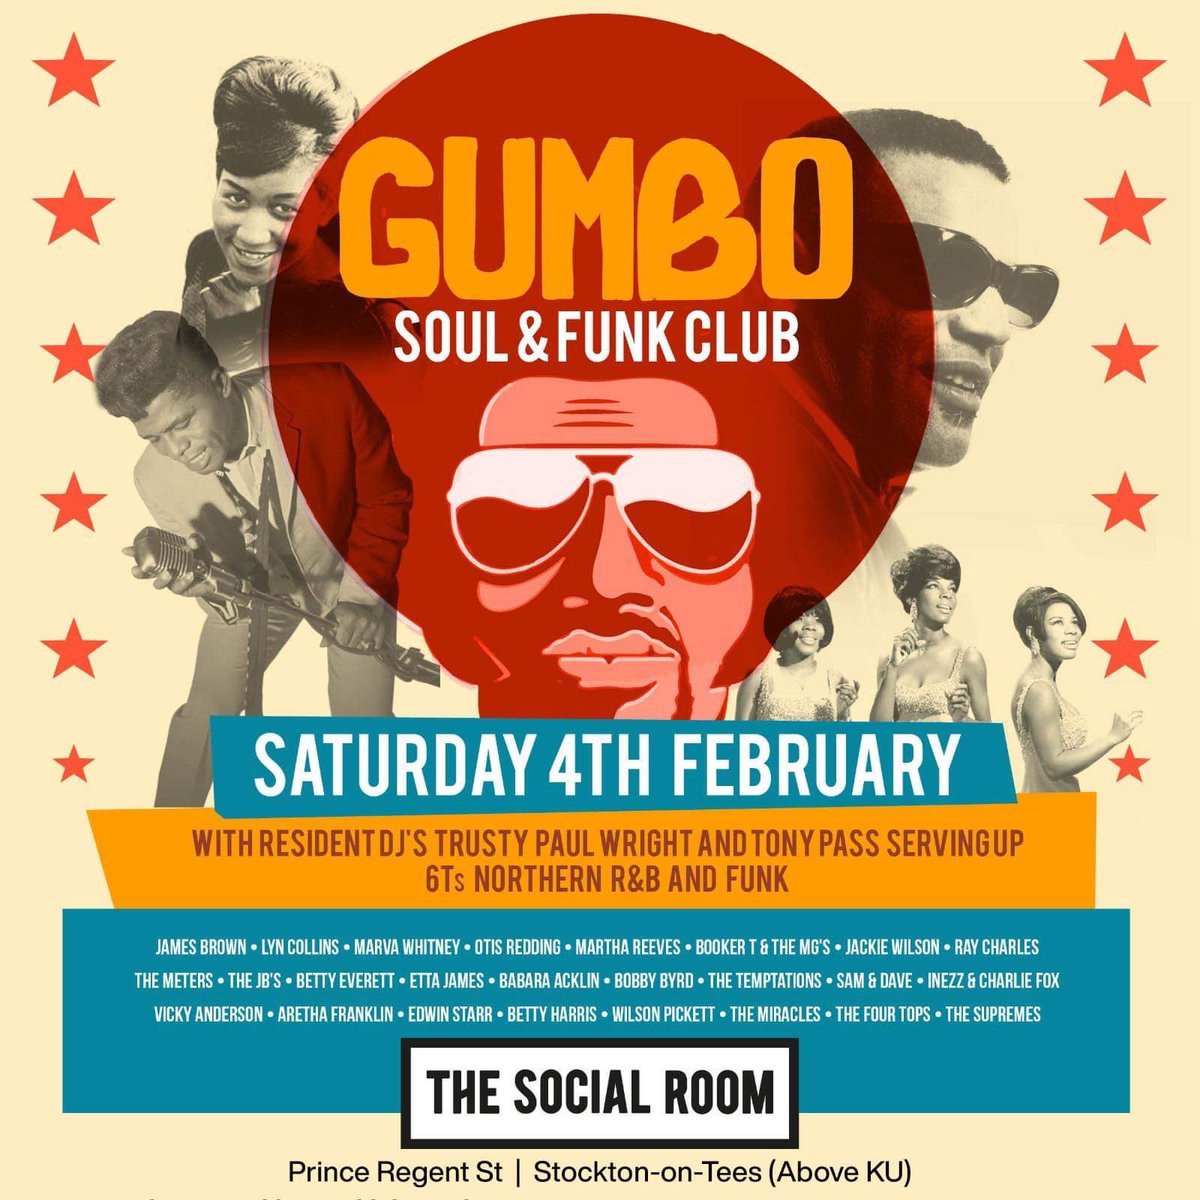 This Saturday📣 The Sound of Soul is back🙌 GUMBO with DJs Trusty, Paul Wright and Tony Pass spinning up the best 6Ts Northern R&B and Funk by the likes of James Brown, Lyn Collins, Marva Whitney, Otis Redding, Martha Reeves .. 🎫 bit.ly/40gbFOD